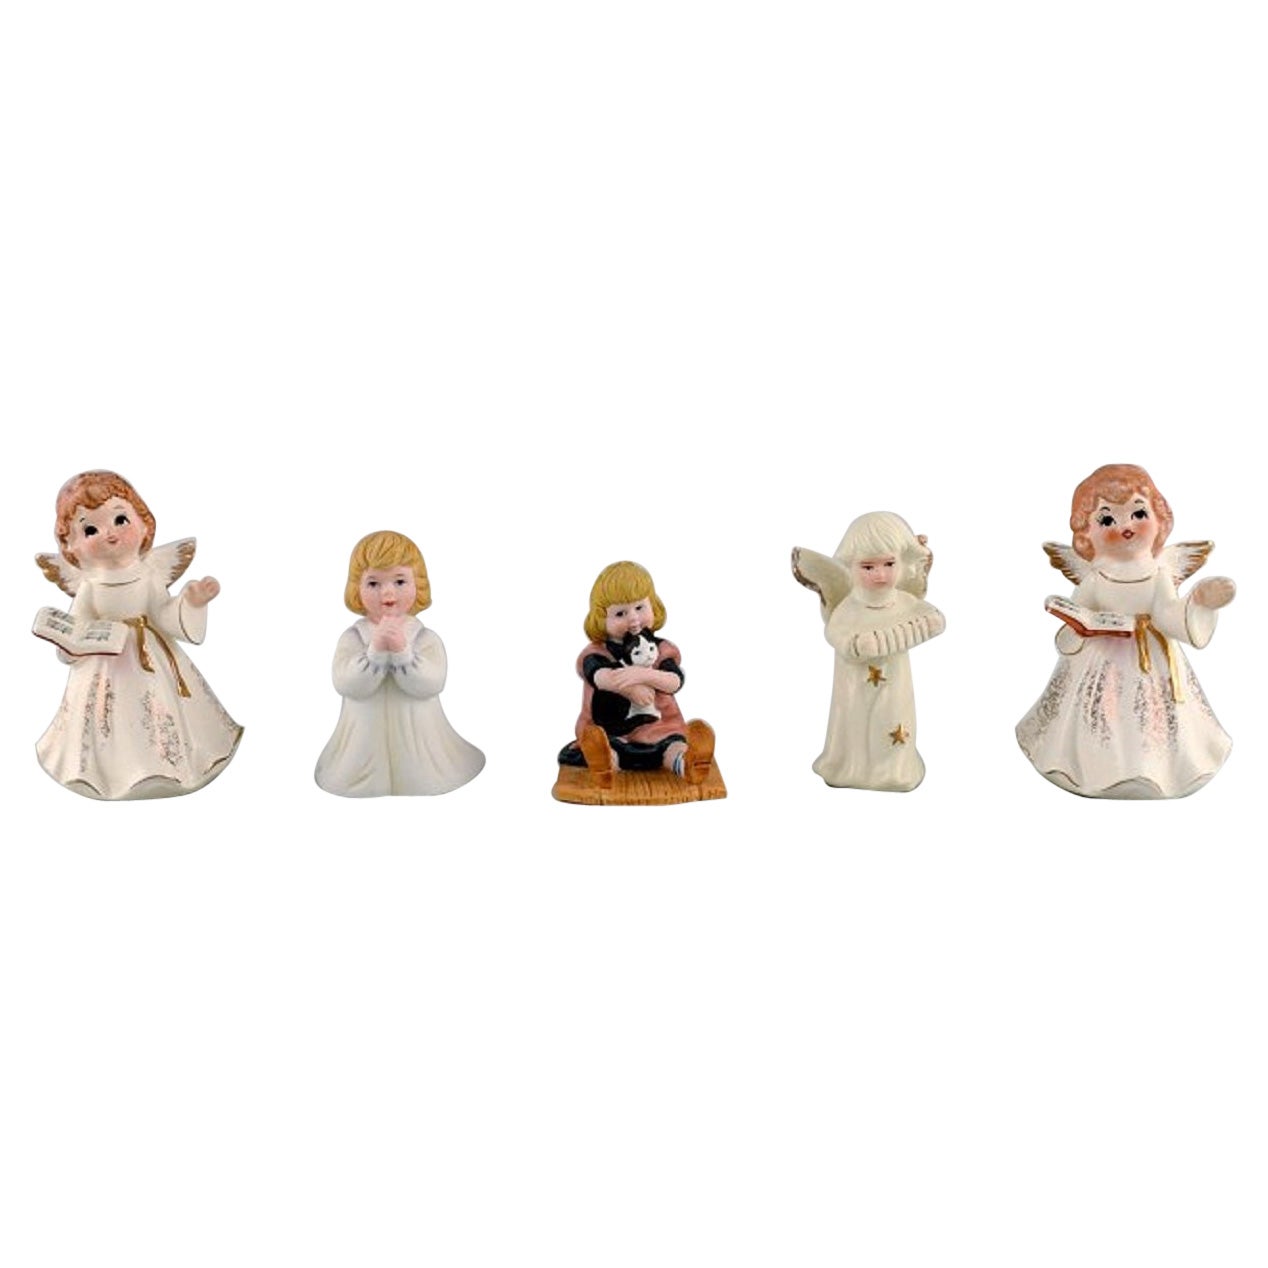 Five Porcelain Figurines, Angels and Children, 1980s